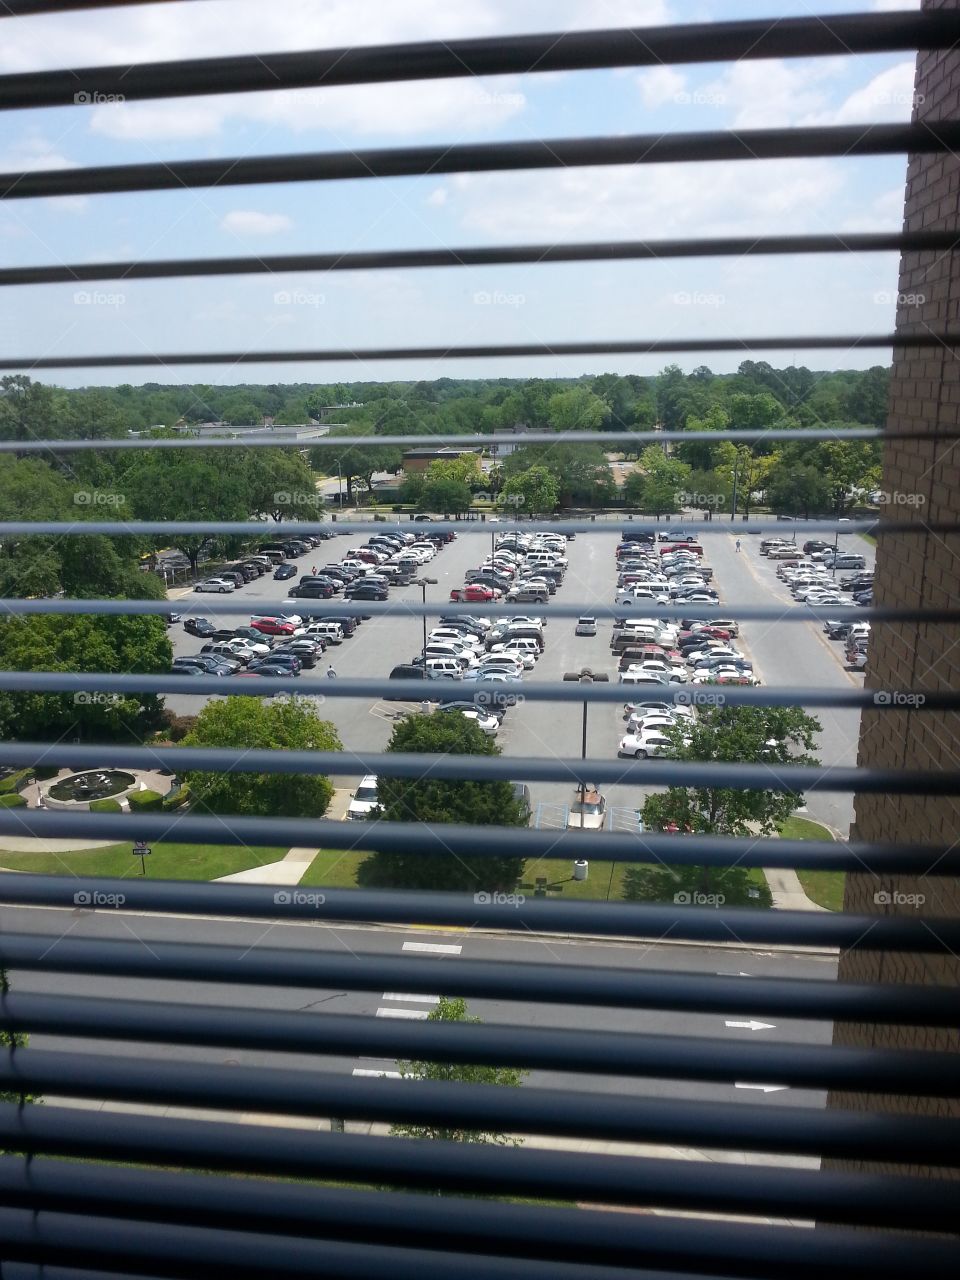 View from hospital in Georgia as we waited.